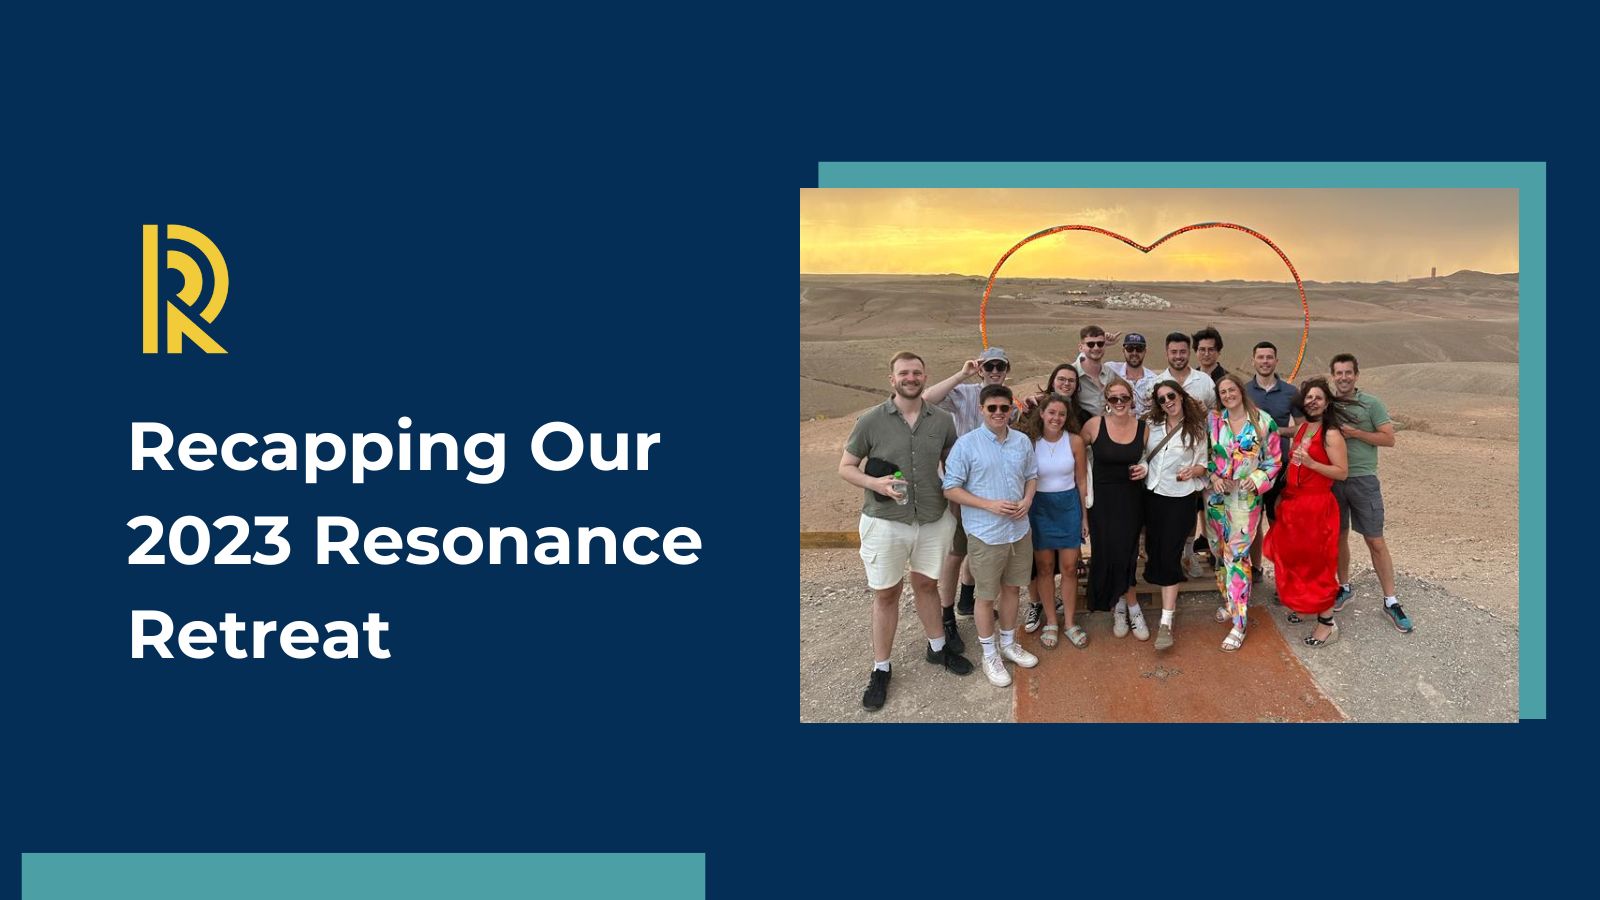 Recapping Our 2023 Resonance Retreat – Alignment, Innovation, and Looking Ahead